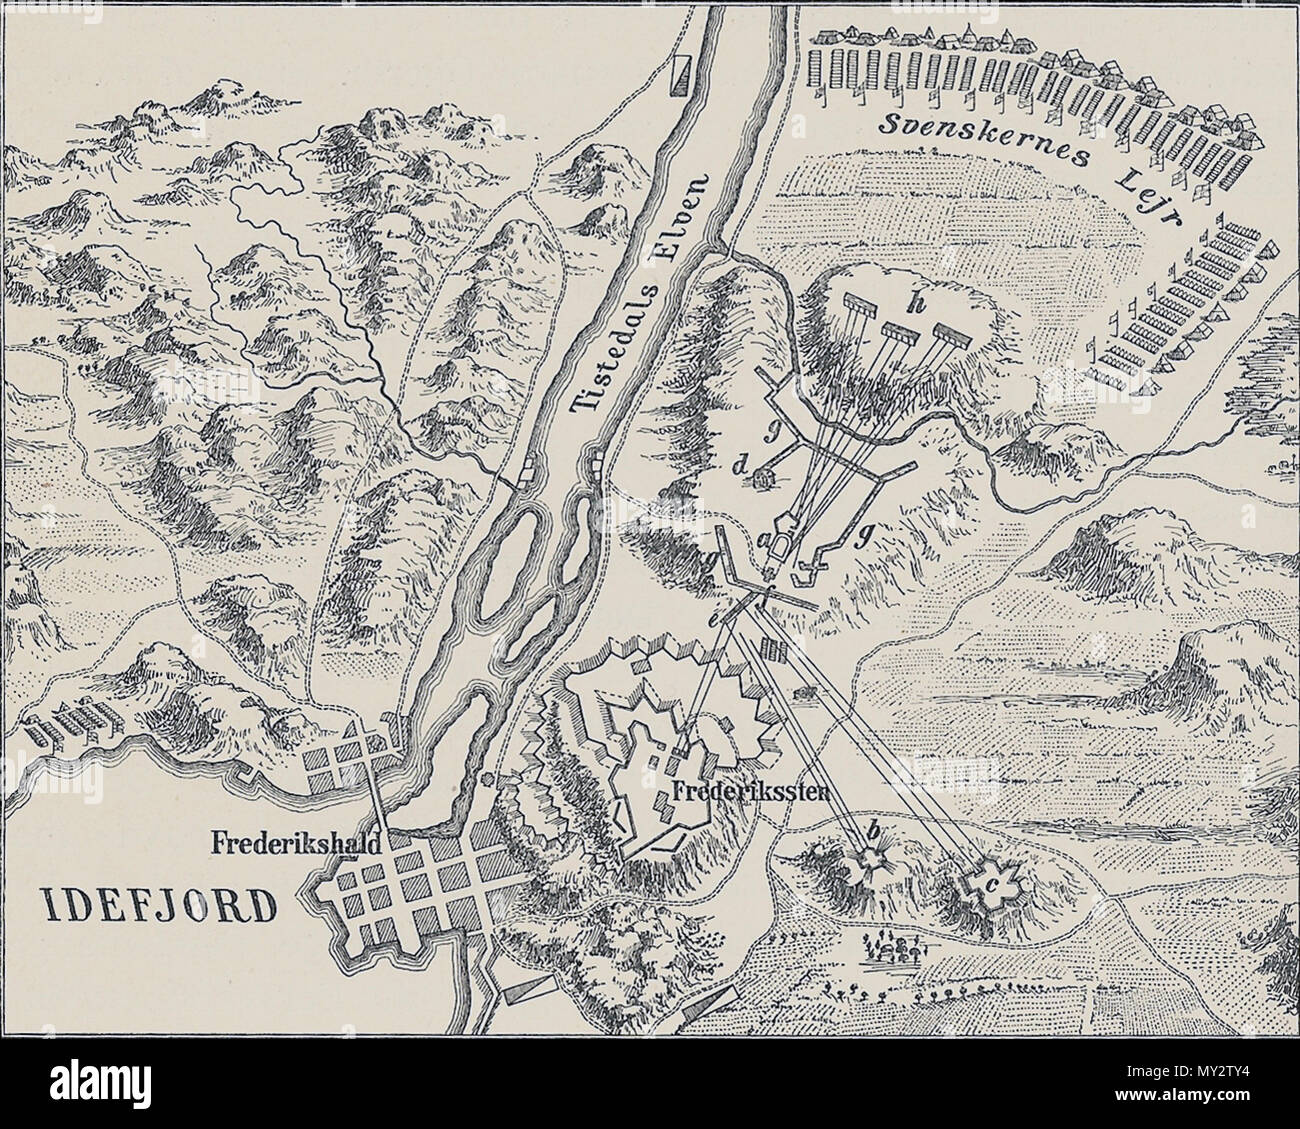 . English: Plan of the Siege of Frederiksten 1718. Key to the letters: a) The Fort Gyldenløve b) The Great Tower c) Overbjerget d) The hut of Karl XII e) The place where Karl XII was shot f & g) Swedish trenches h) Swedish artillery positions . 1907. Saddhiyama 425 Plan of the Siege of Frederiksten 1718 Stock Photo